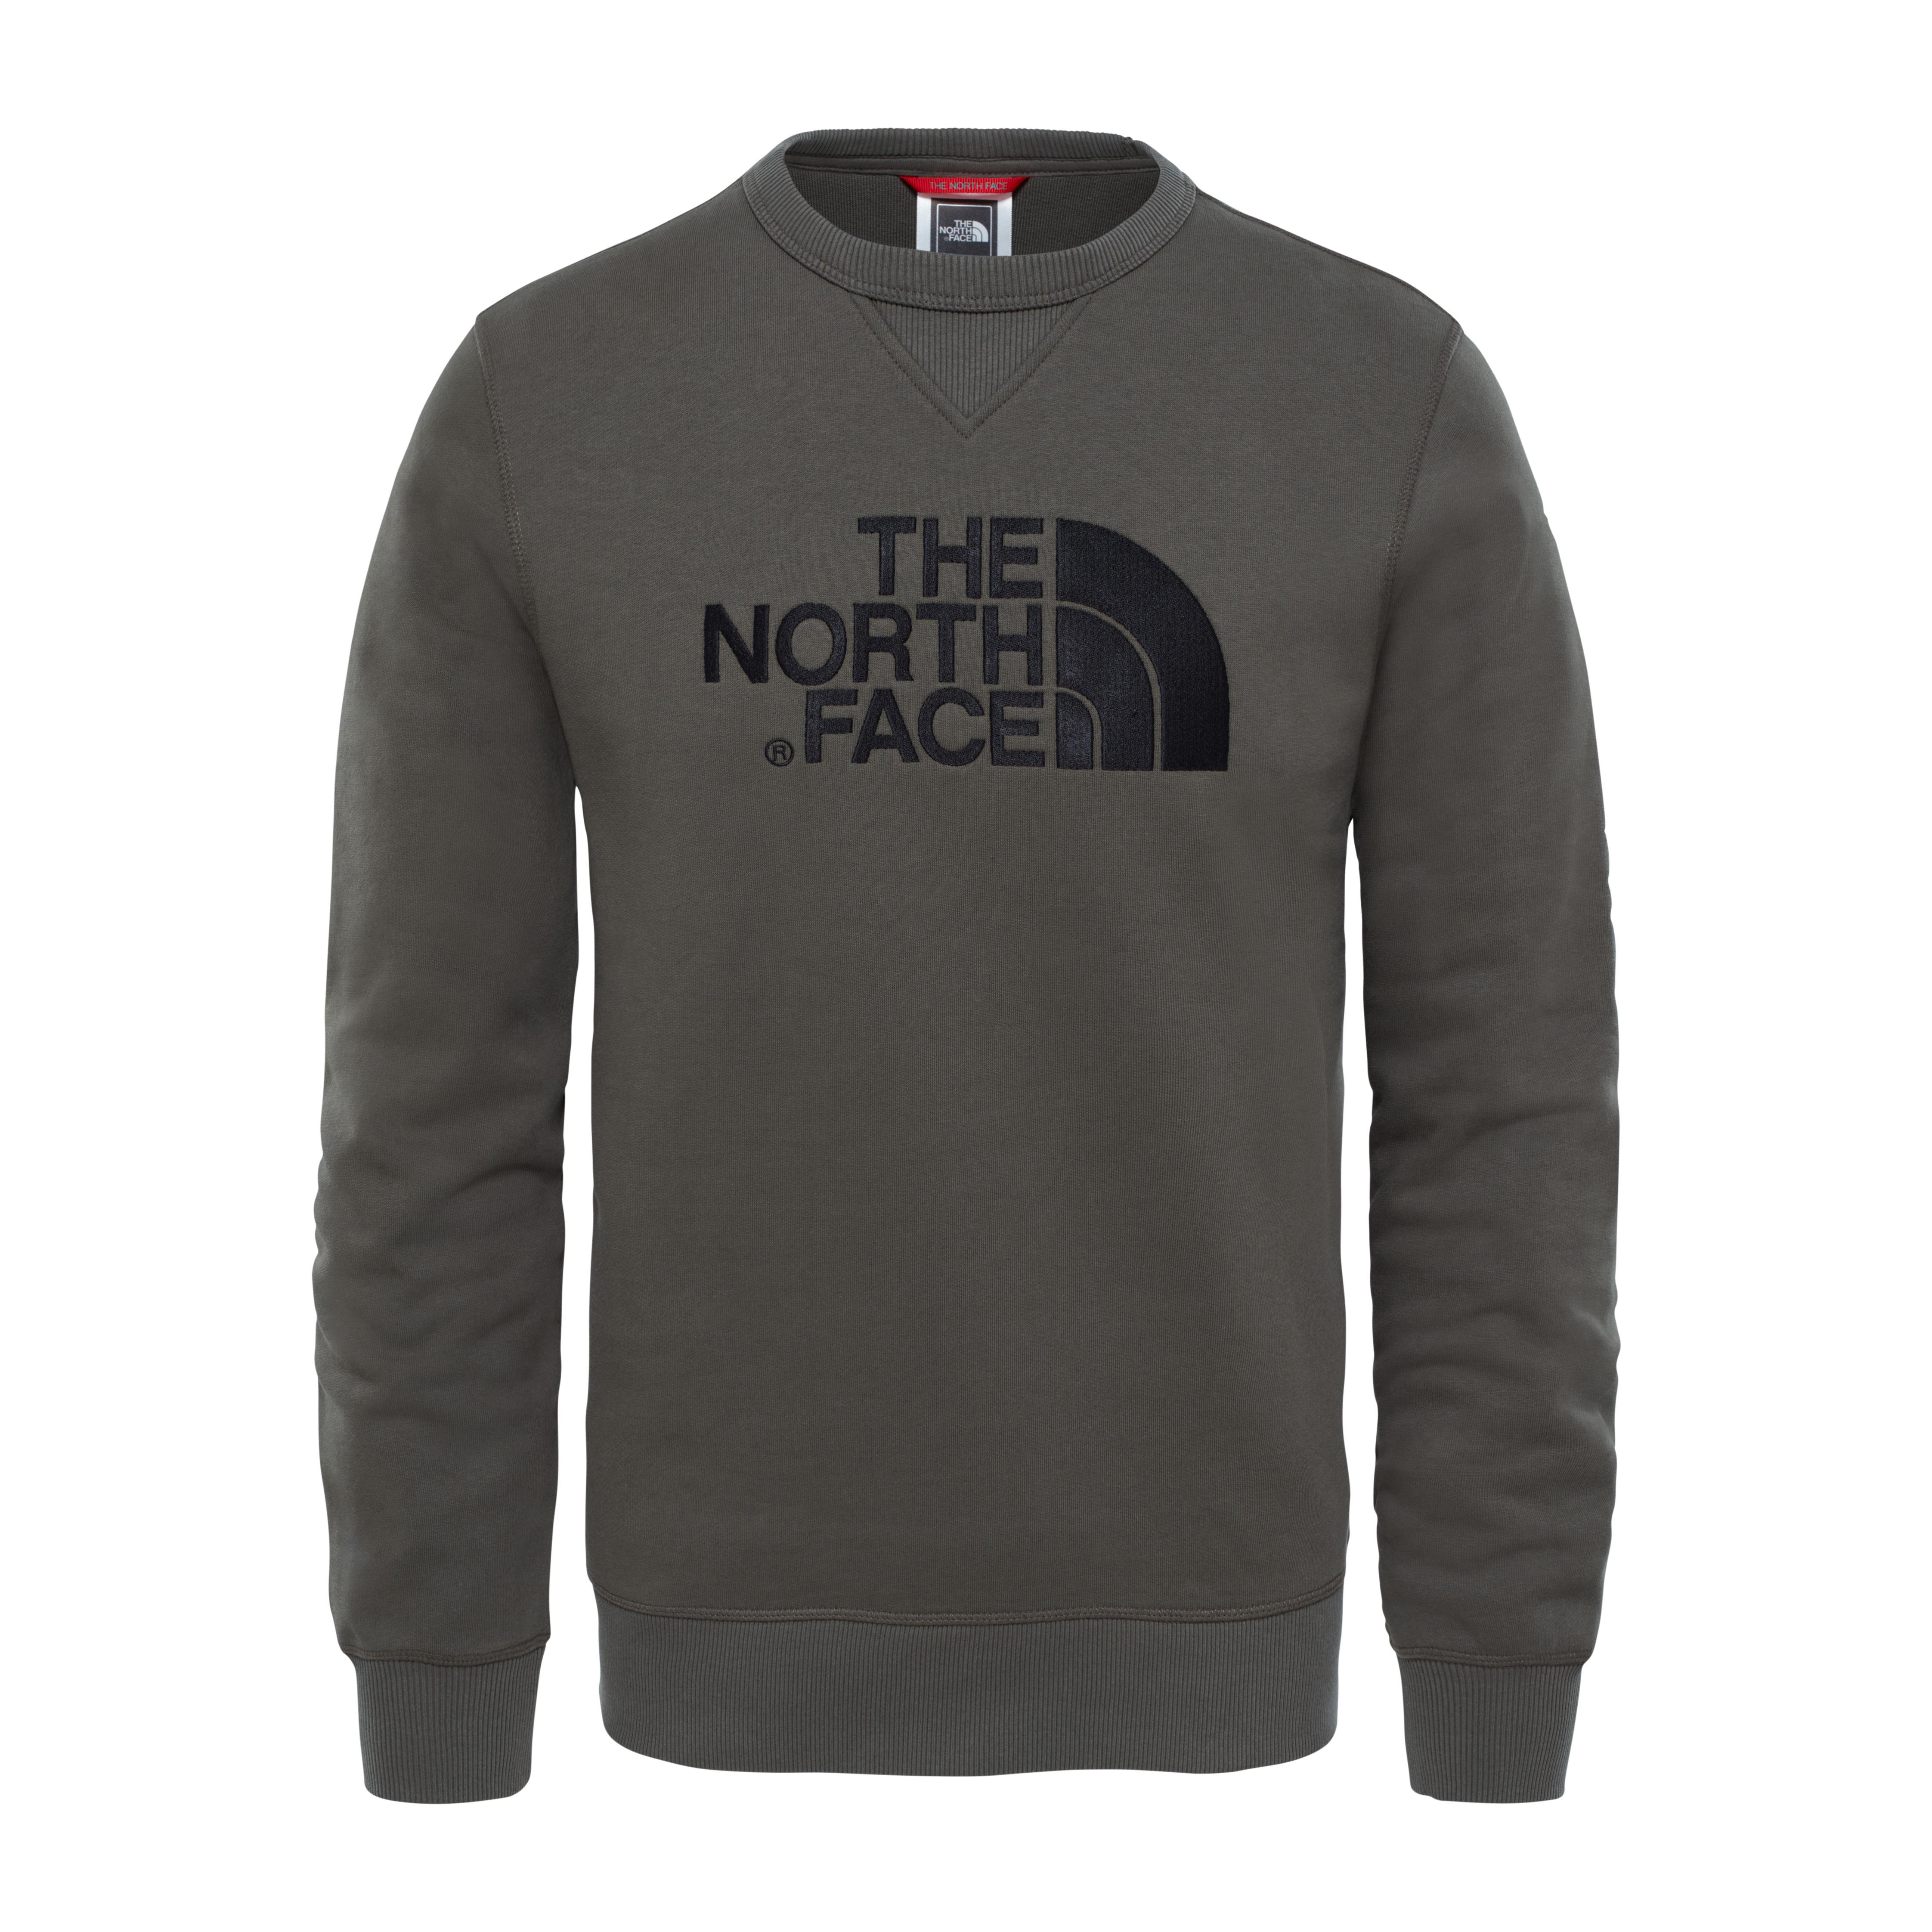 The North Face Sweat Droppic Crew Neck